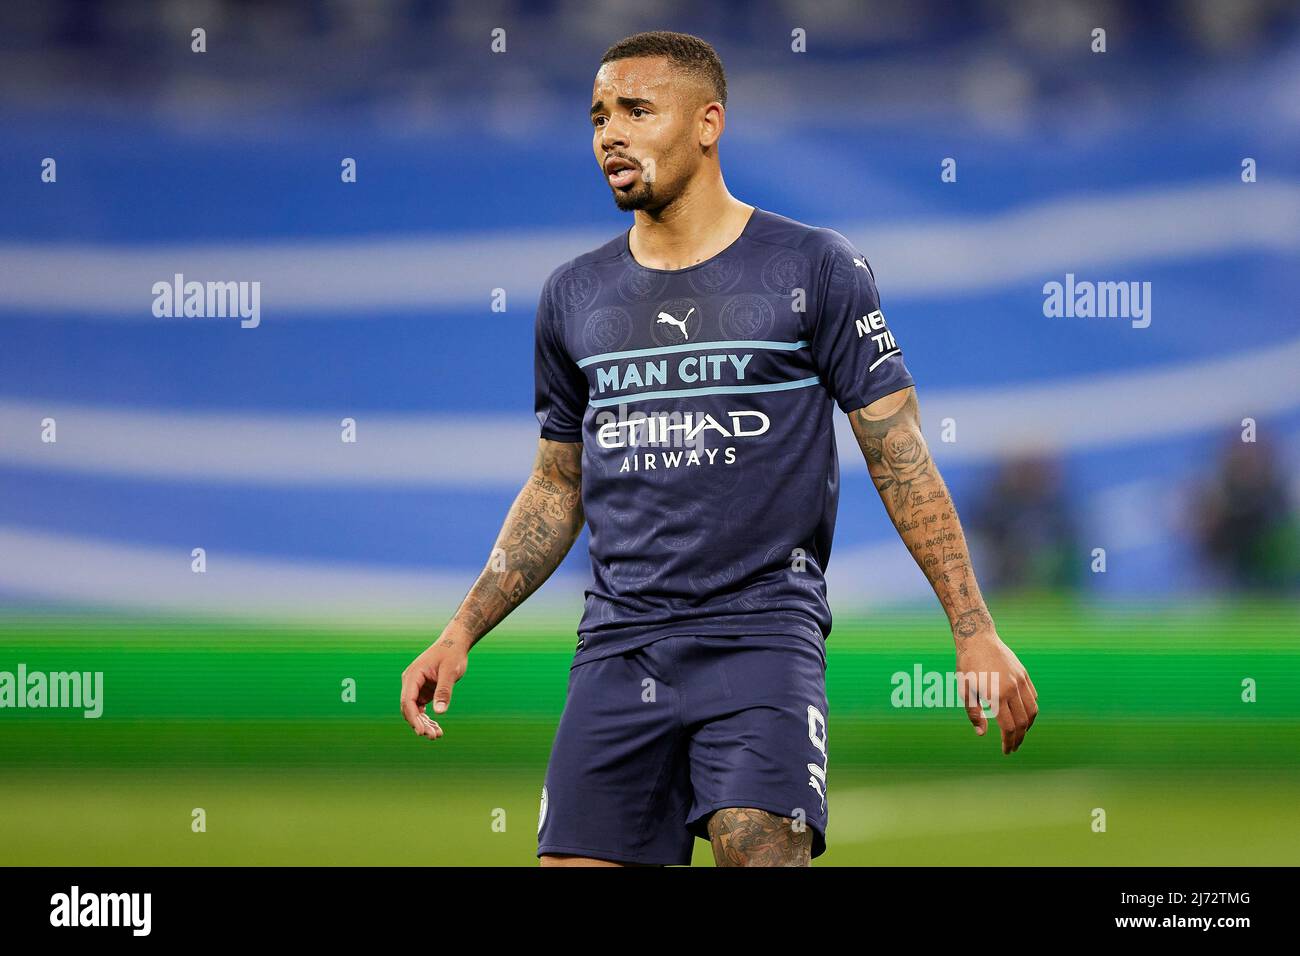 Gabriel Jesus of Manchester City during the UEFA Champions League match between Real Madrid and Mancheaster City played at Santiago Bernabeu Stadium on May 4, 2021 in Madrid Spain. (Photo by Ruben Albarran / PRESSINPHOTO) Stock Photo